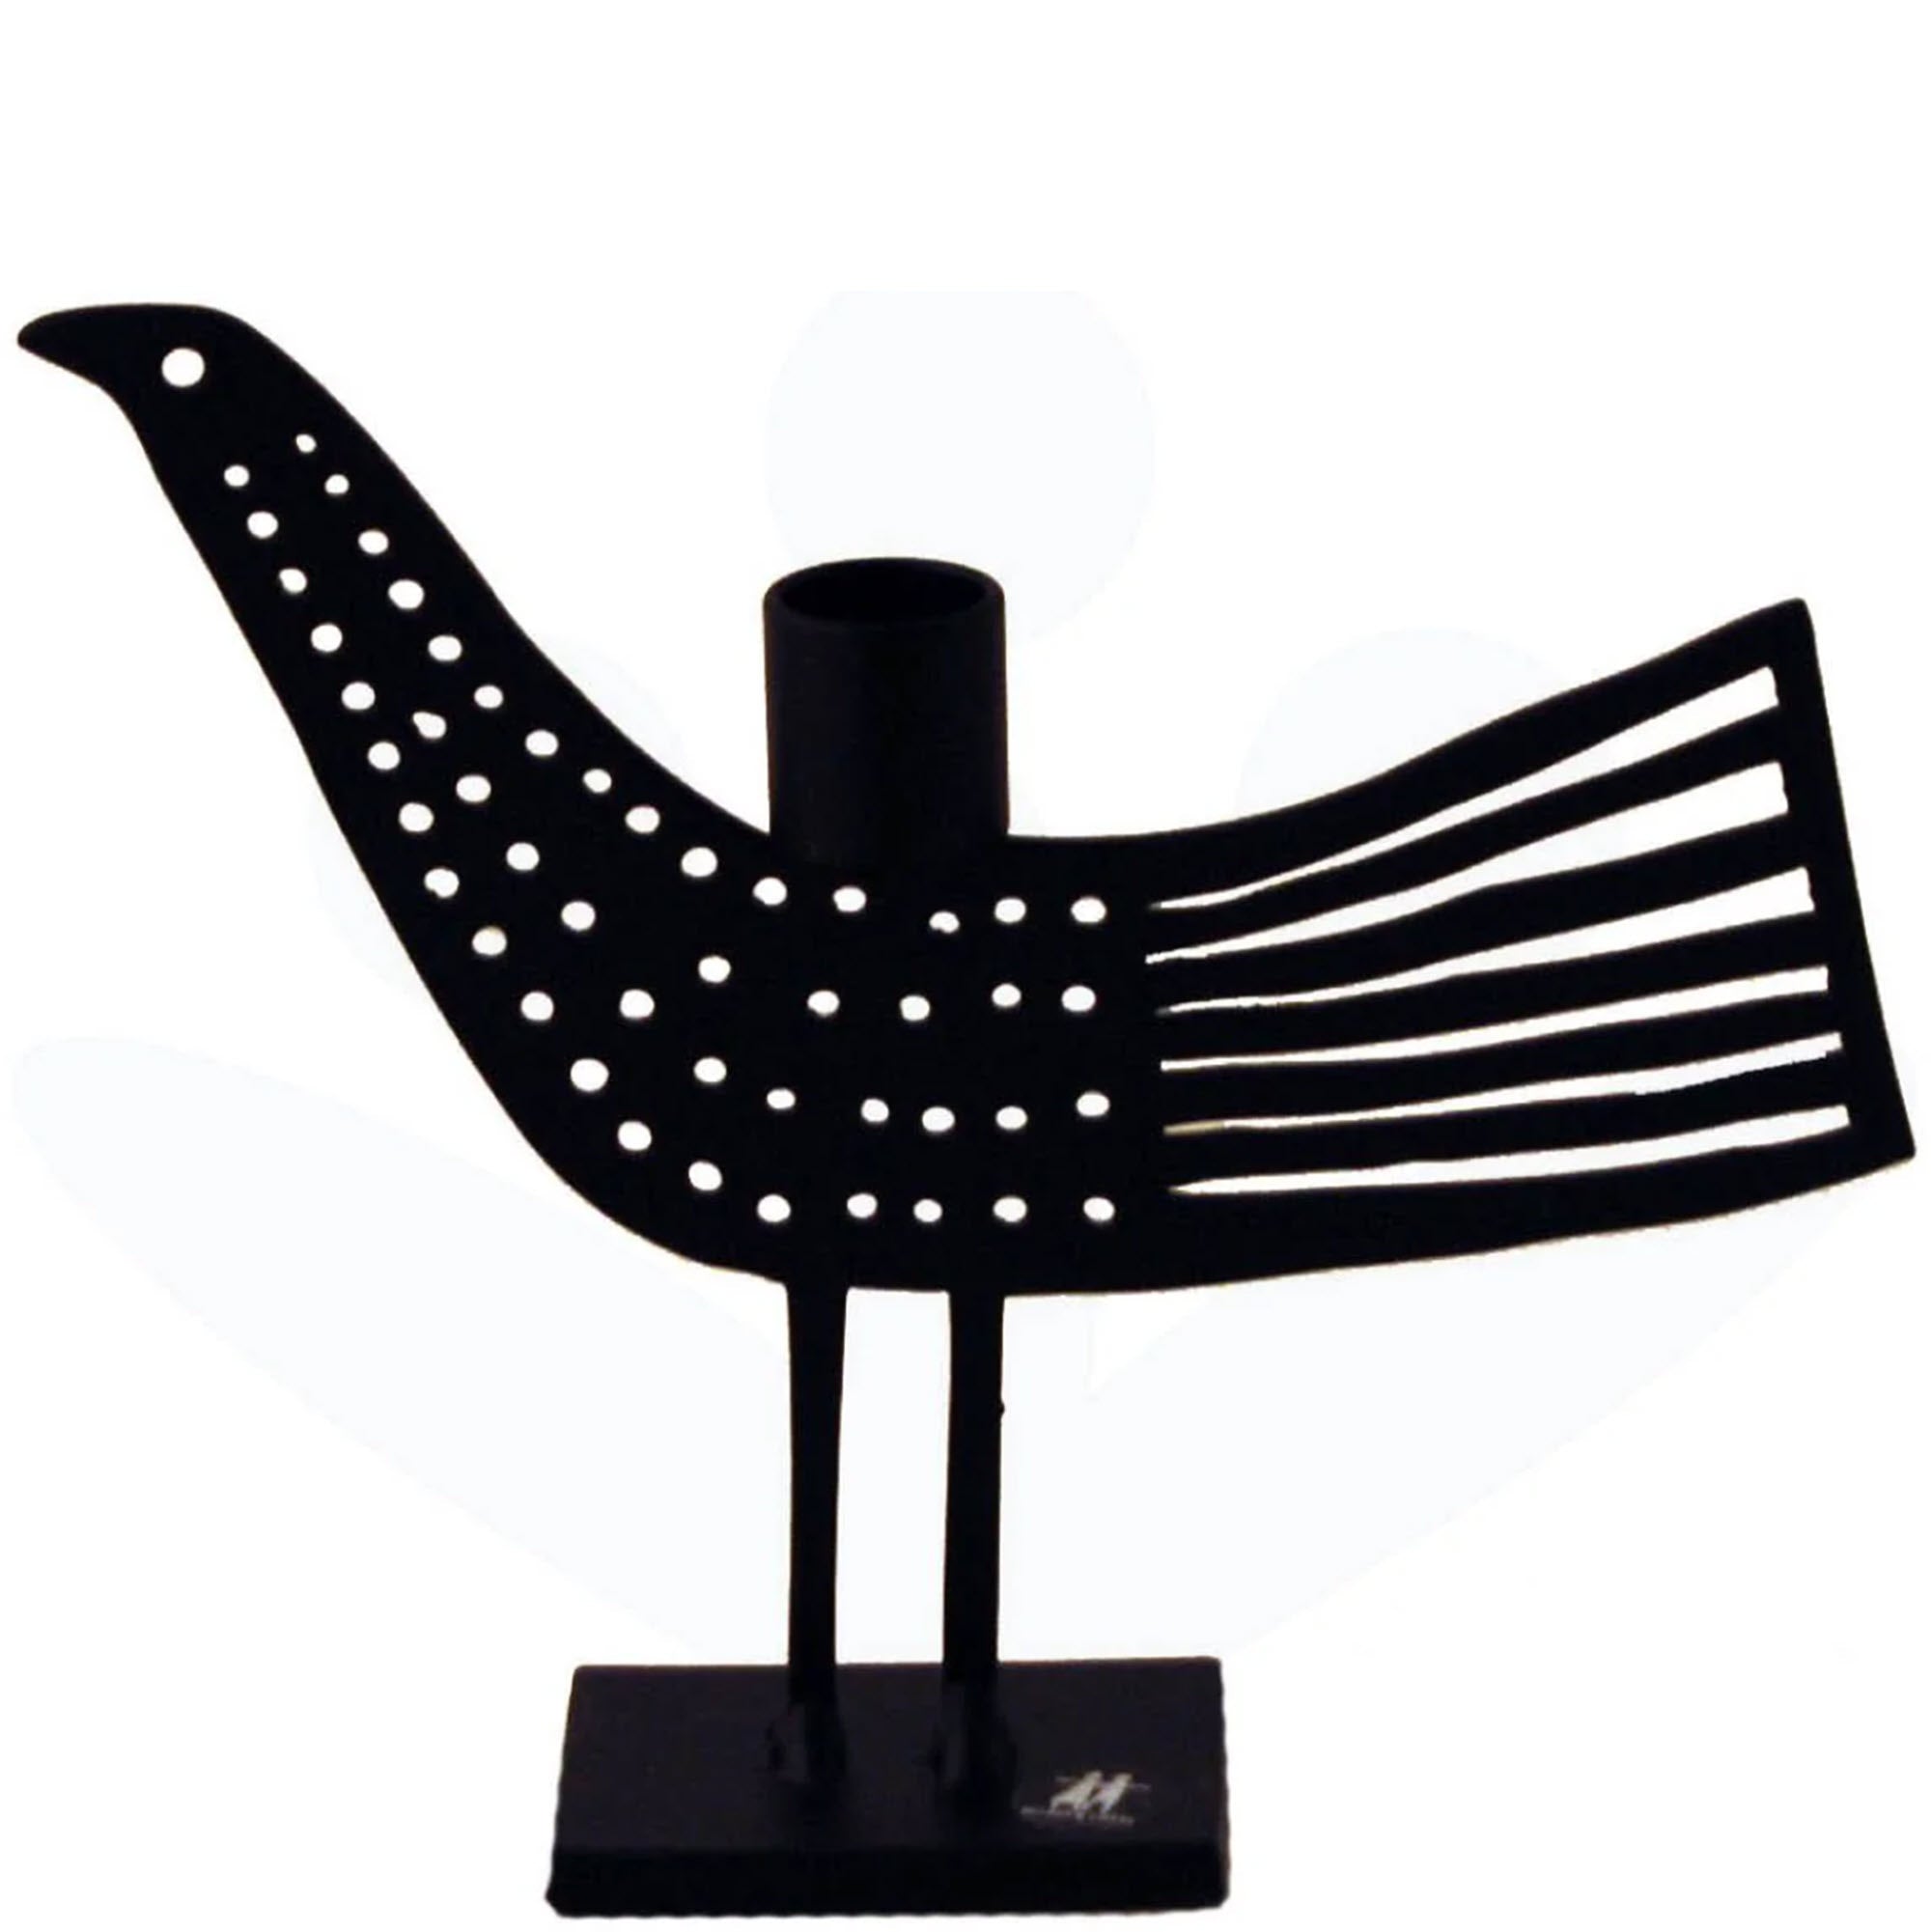 Artistic Bird Shape Candle Holder made of Black Iron and contains holes in the body of the bird to represent dots and cutout lines in the tail to represent feathers. 